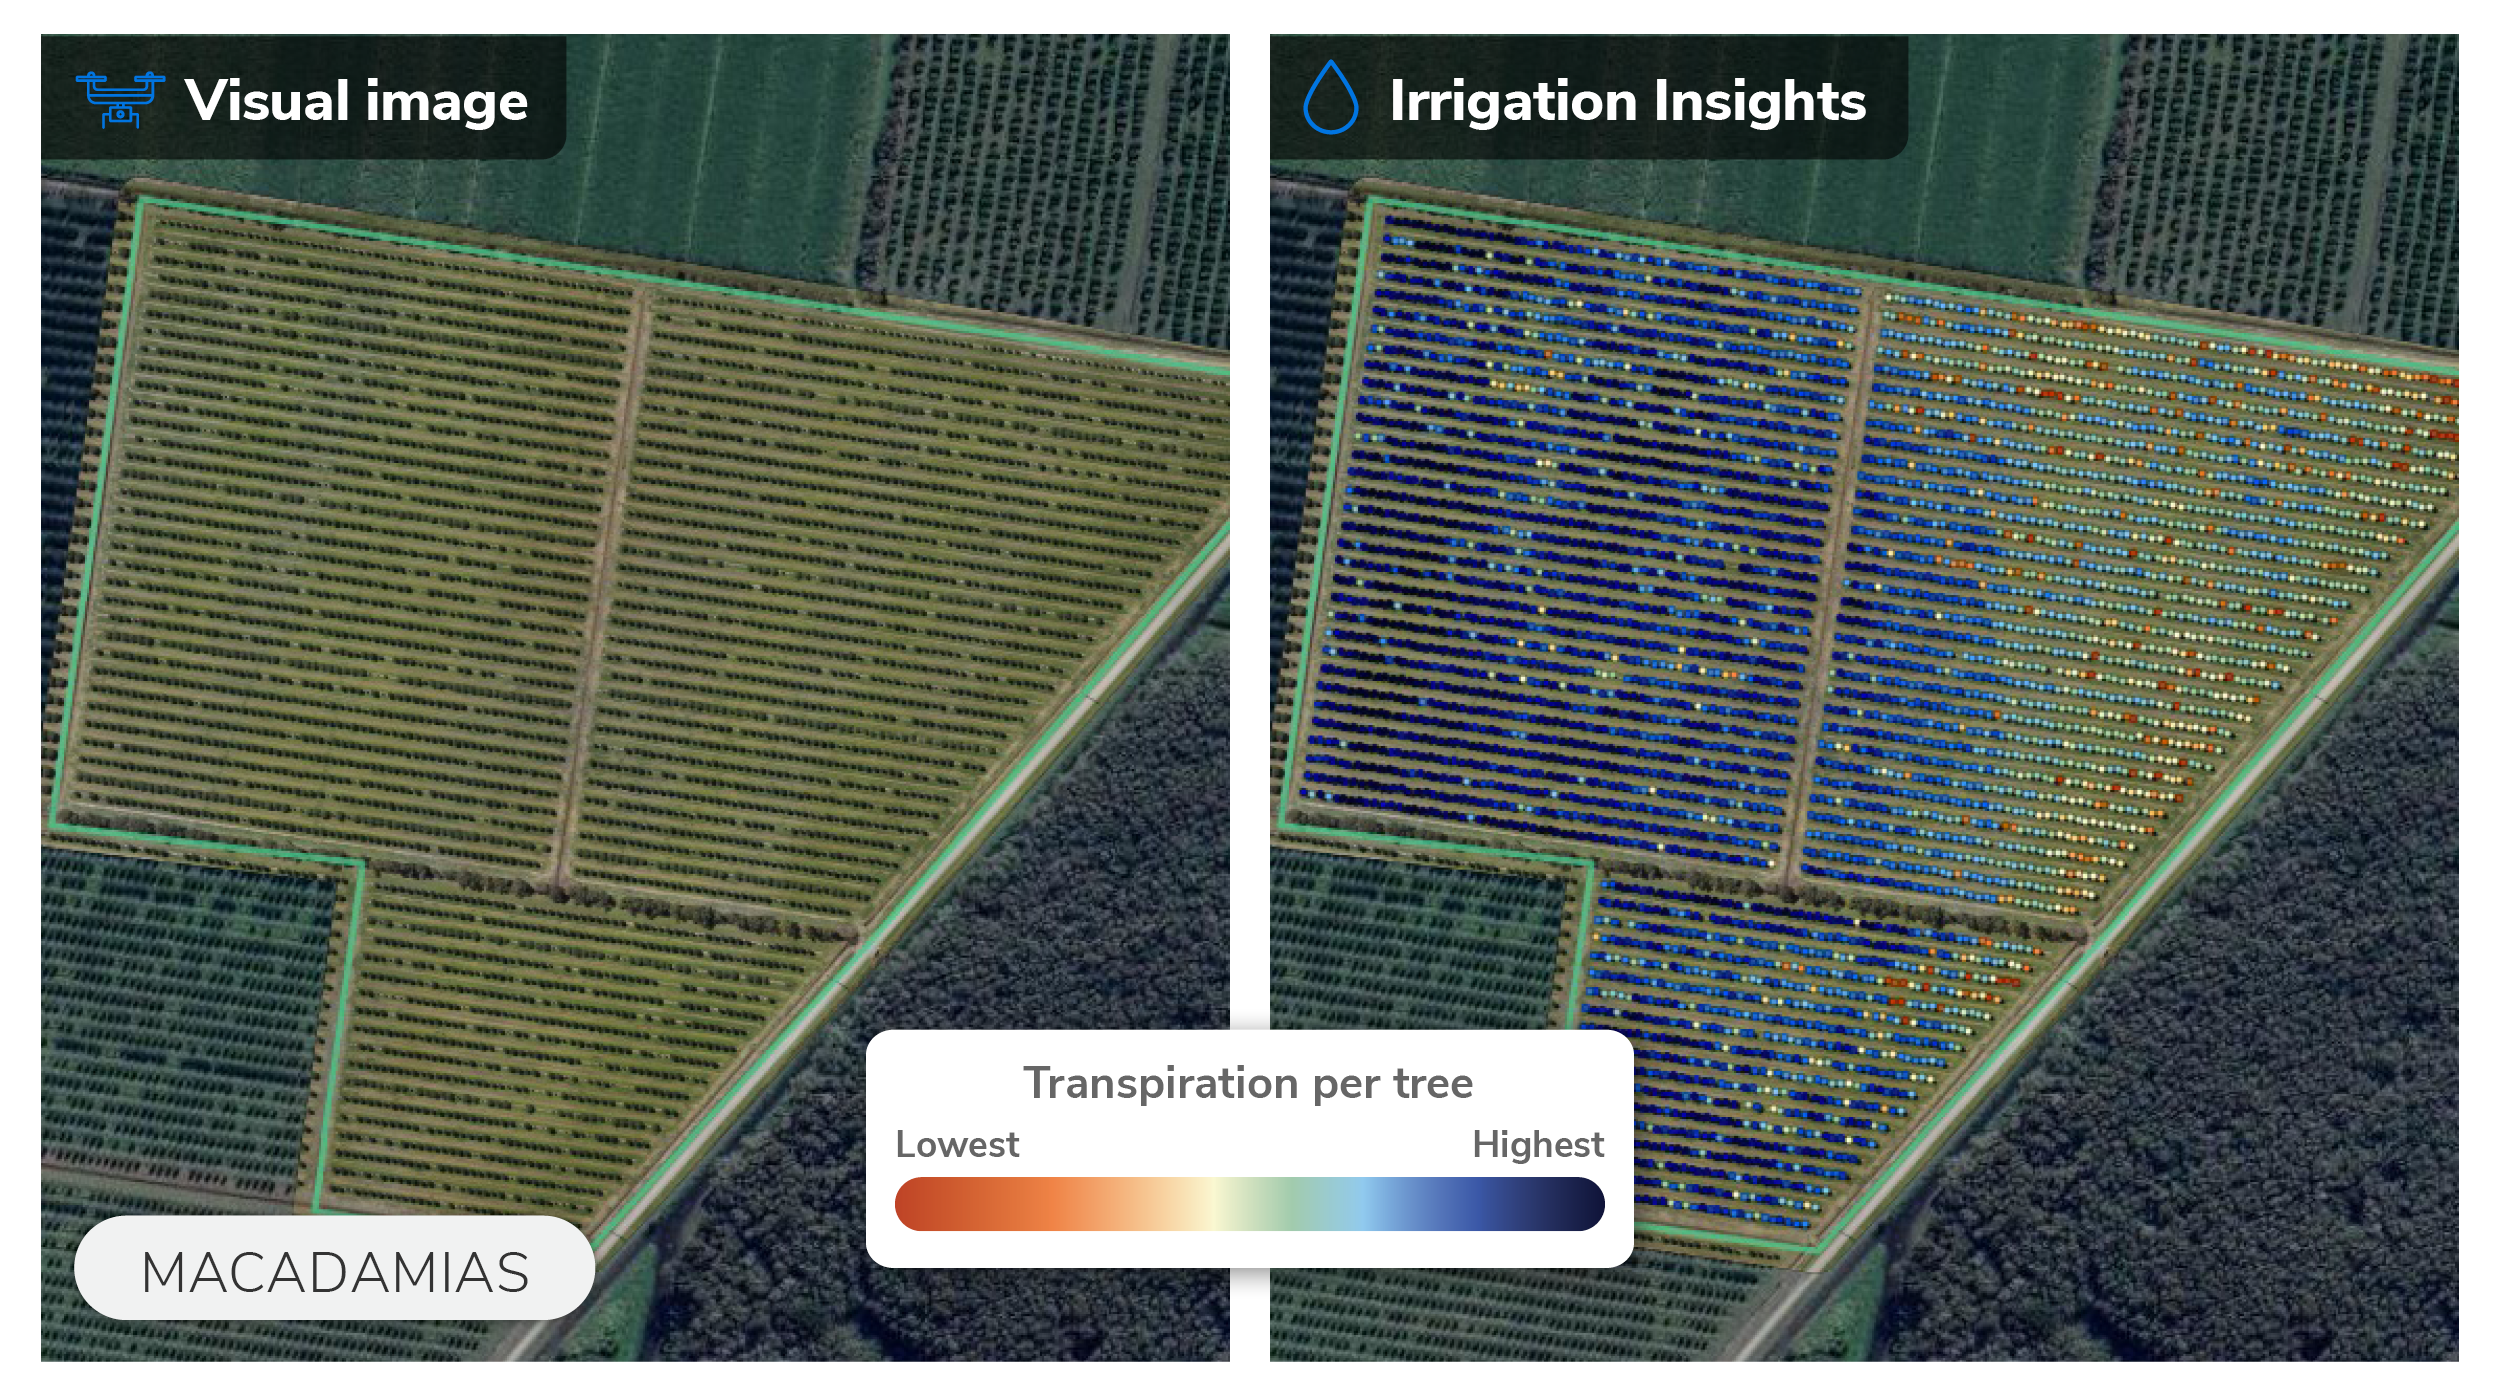 Aerobotics provides irrigation insights for fruit and nut growers.png